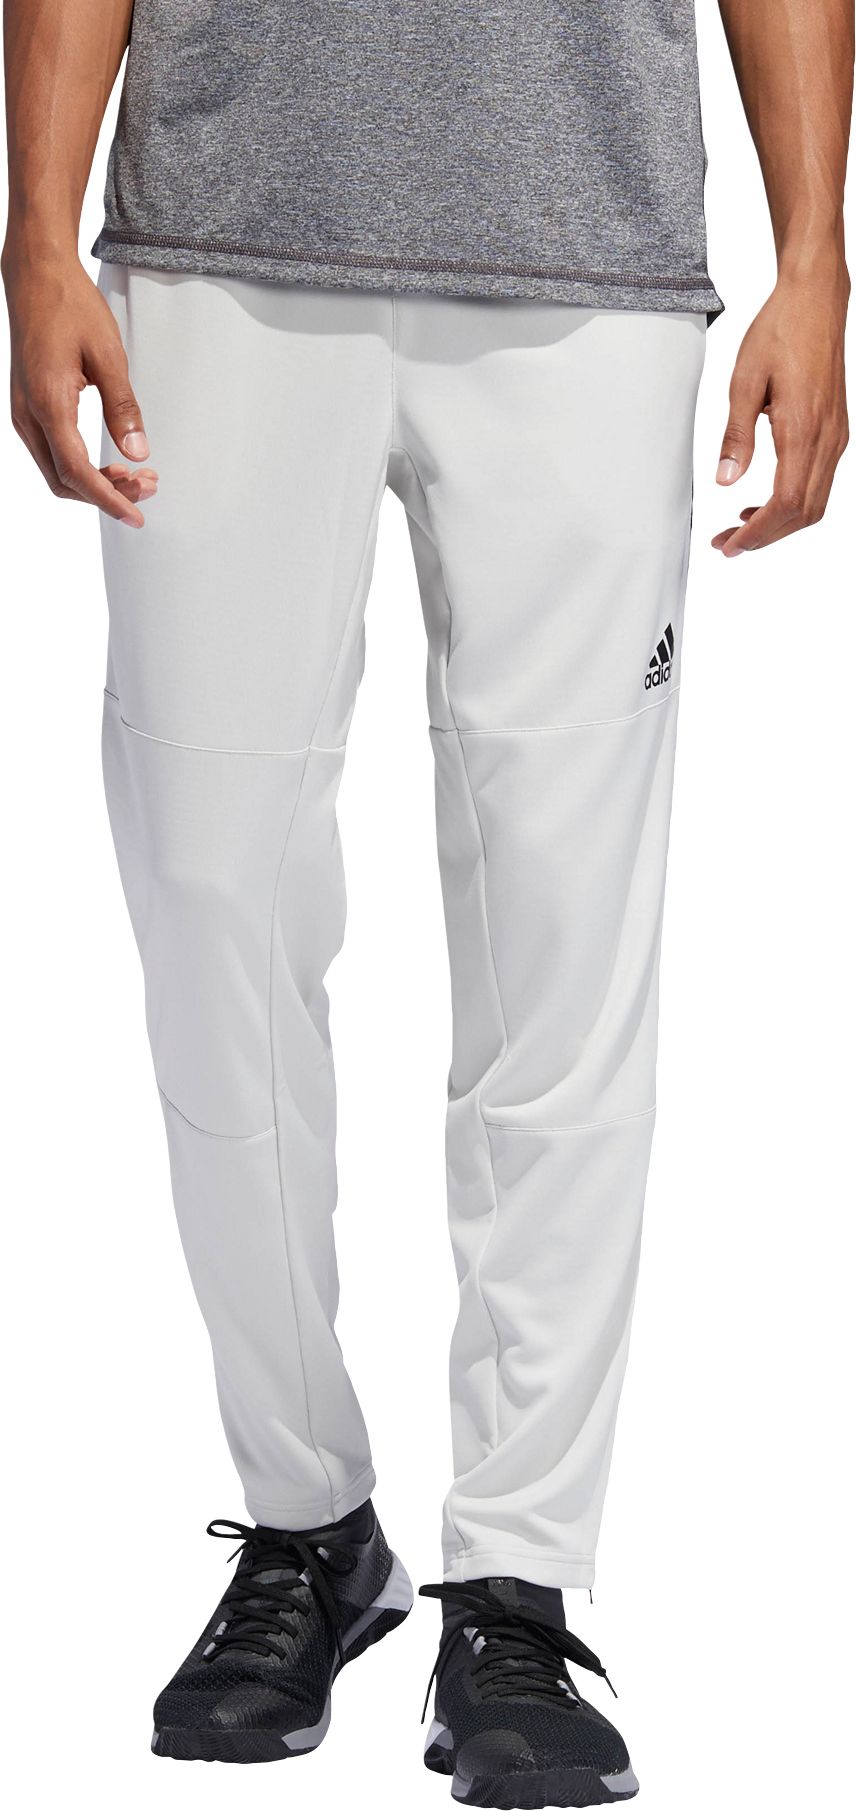 adidas Men's Axis Point Pants - .97